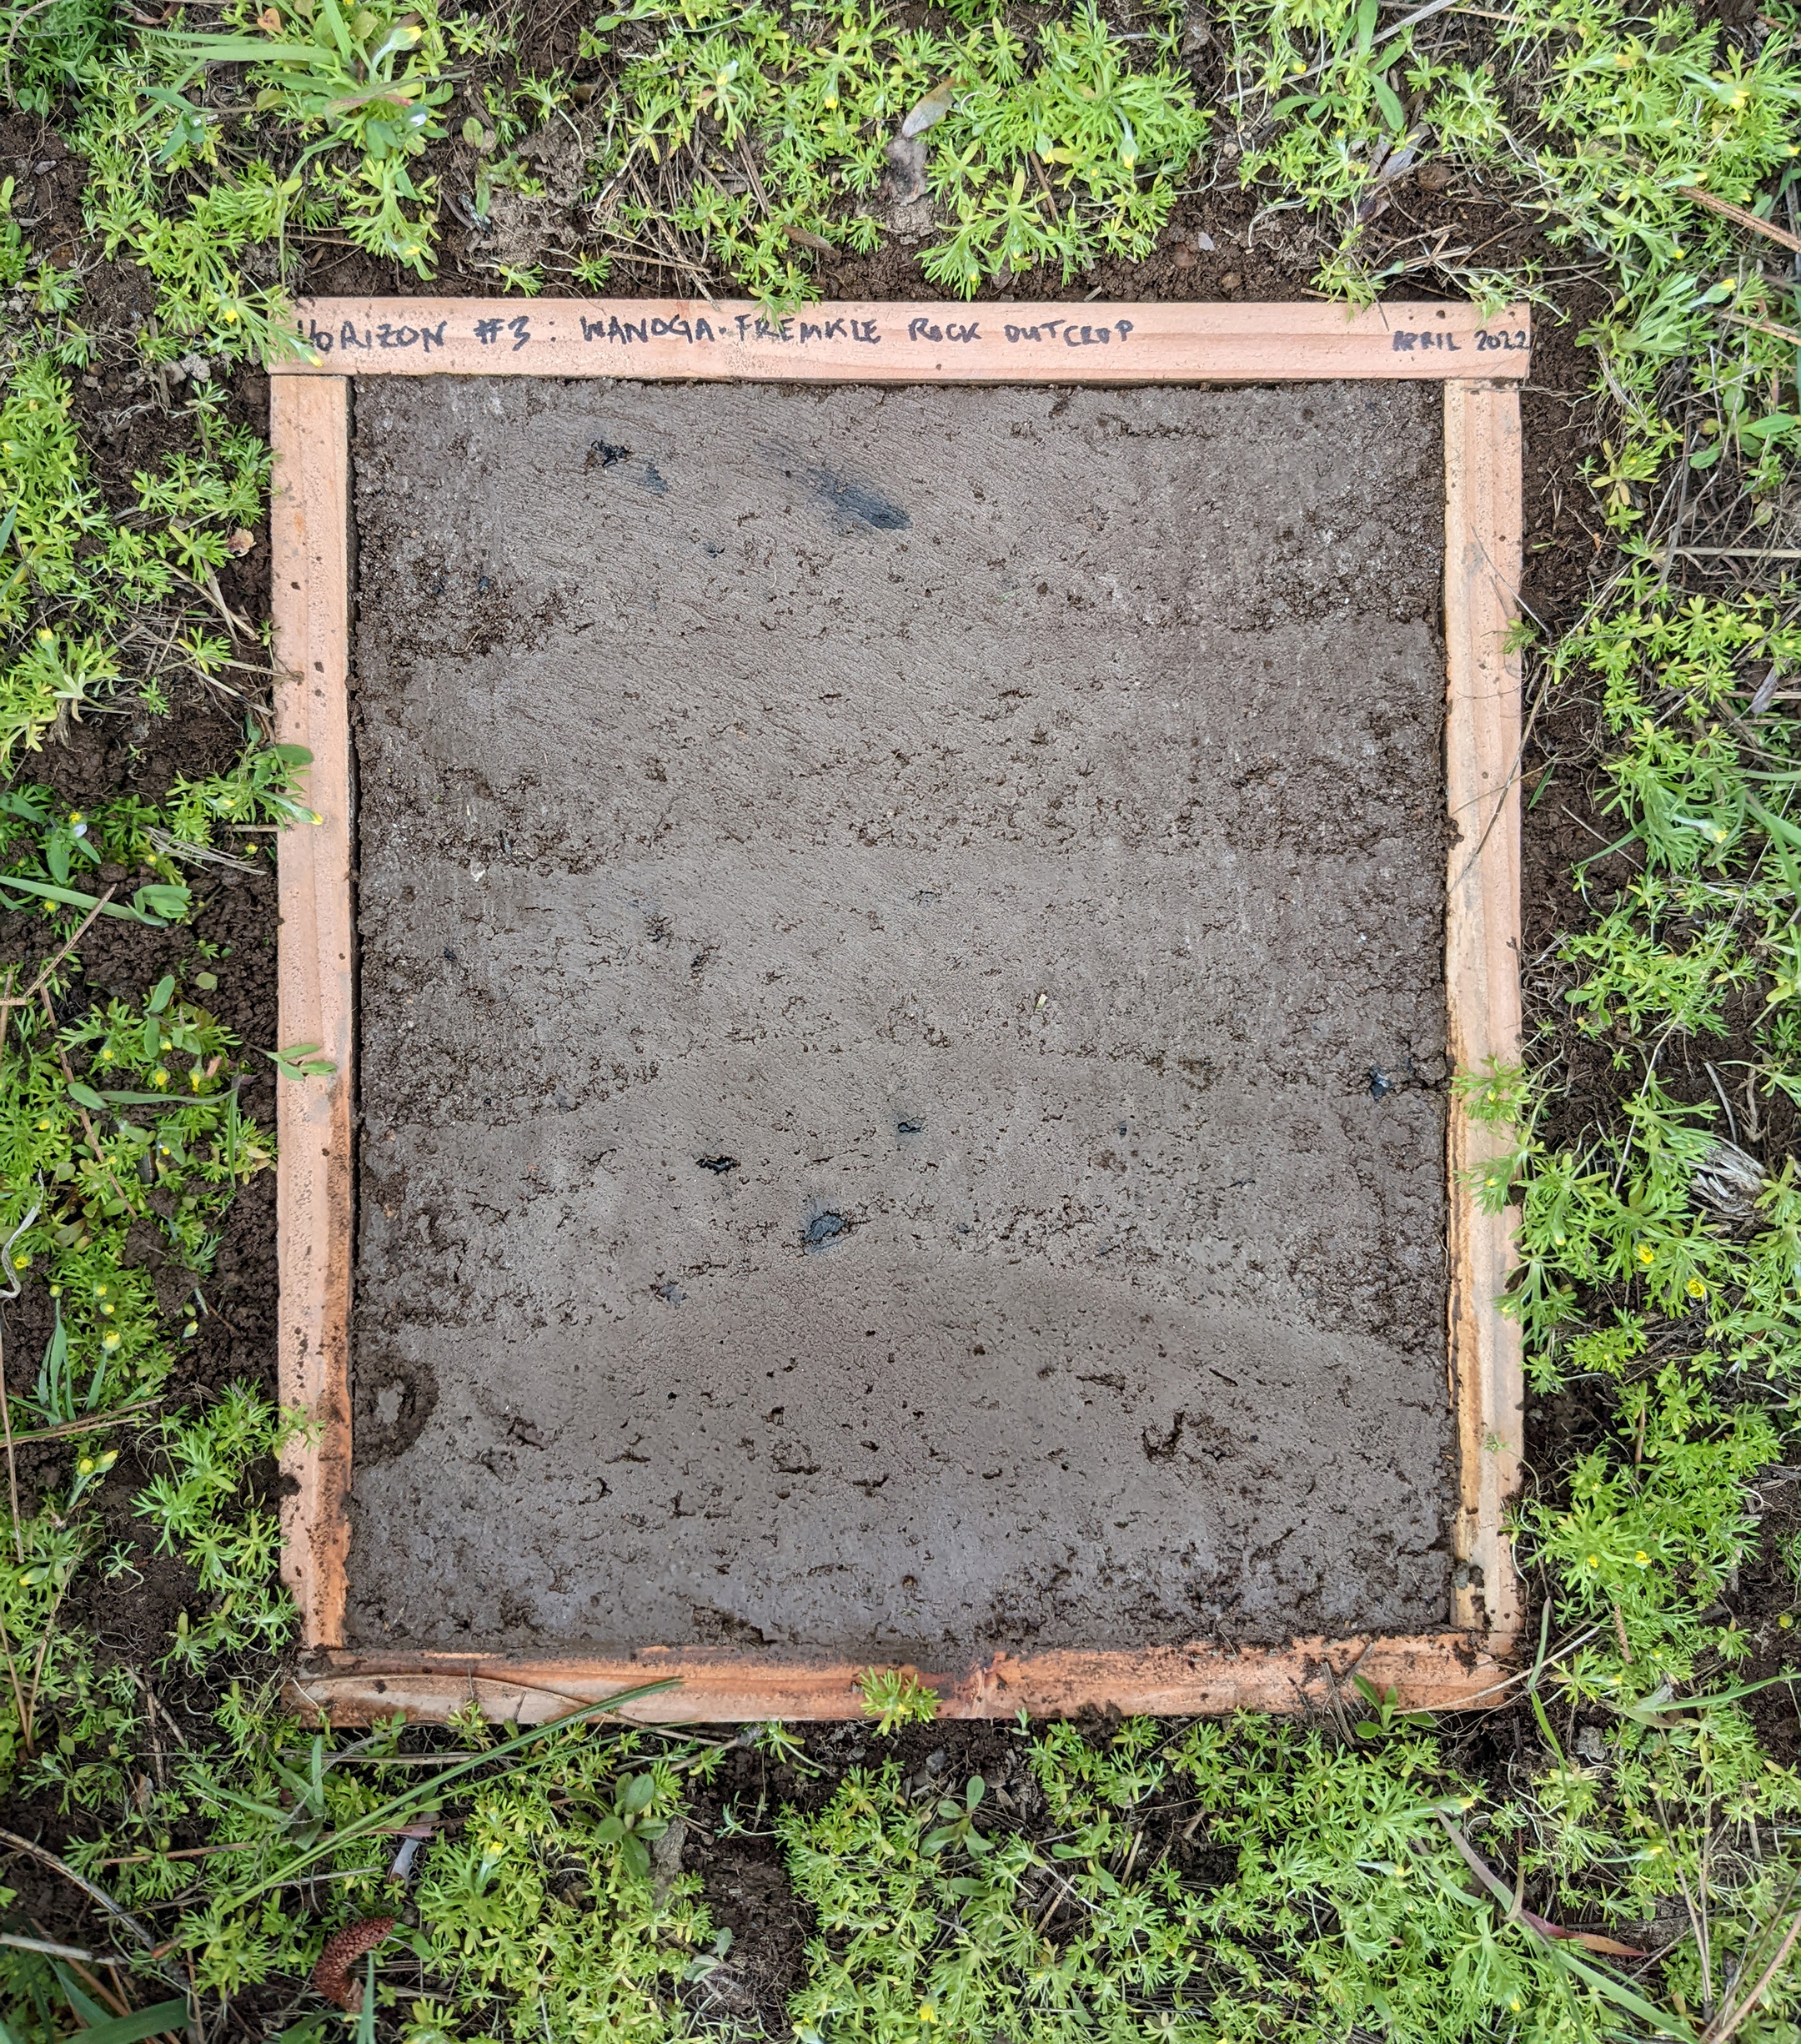 A wood frame surrounds a sample of soil, marking it off from the rest of the ground surrounding it.